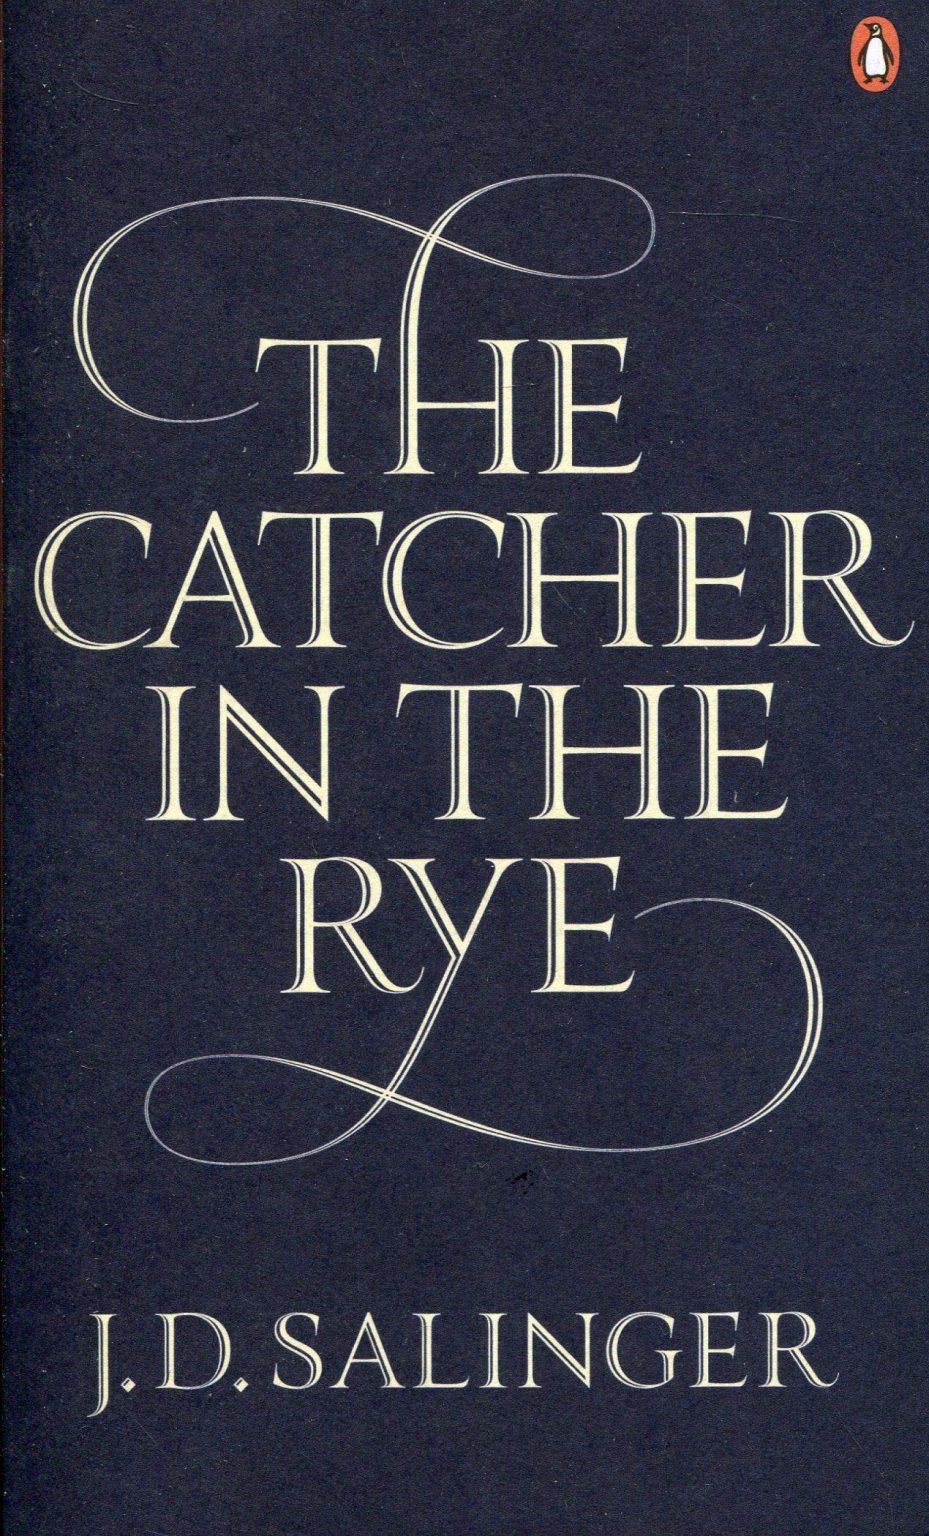 book report the catcher in the rye